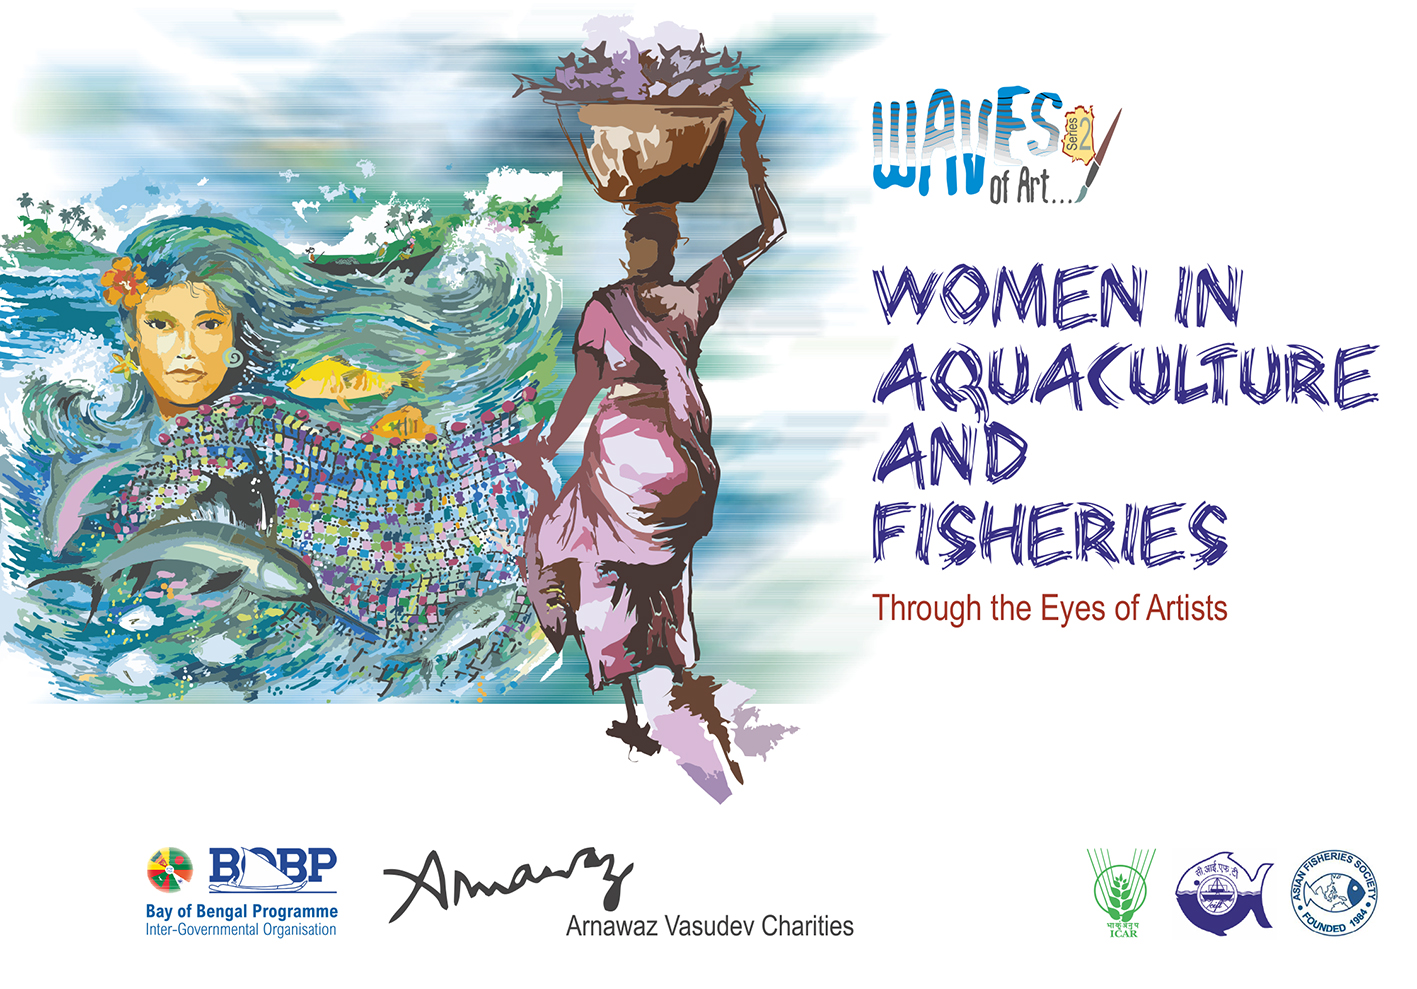 'Waves of Art'- a book of paintings on women in aquaculture and fisheries unveiled